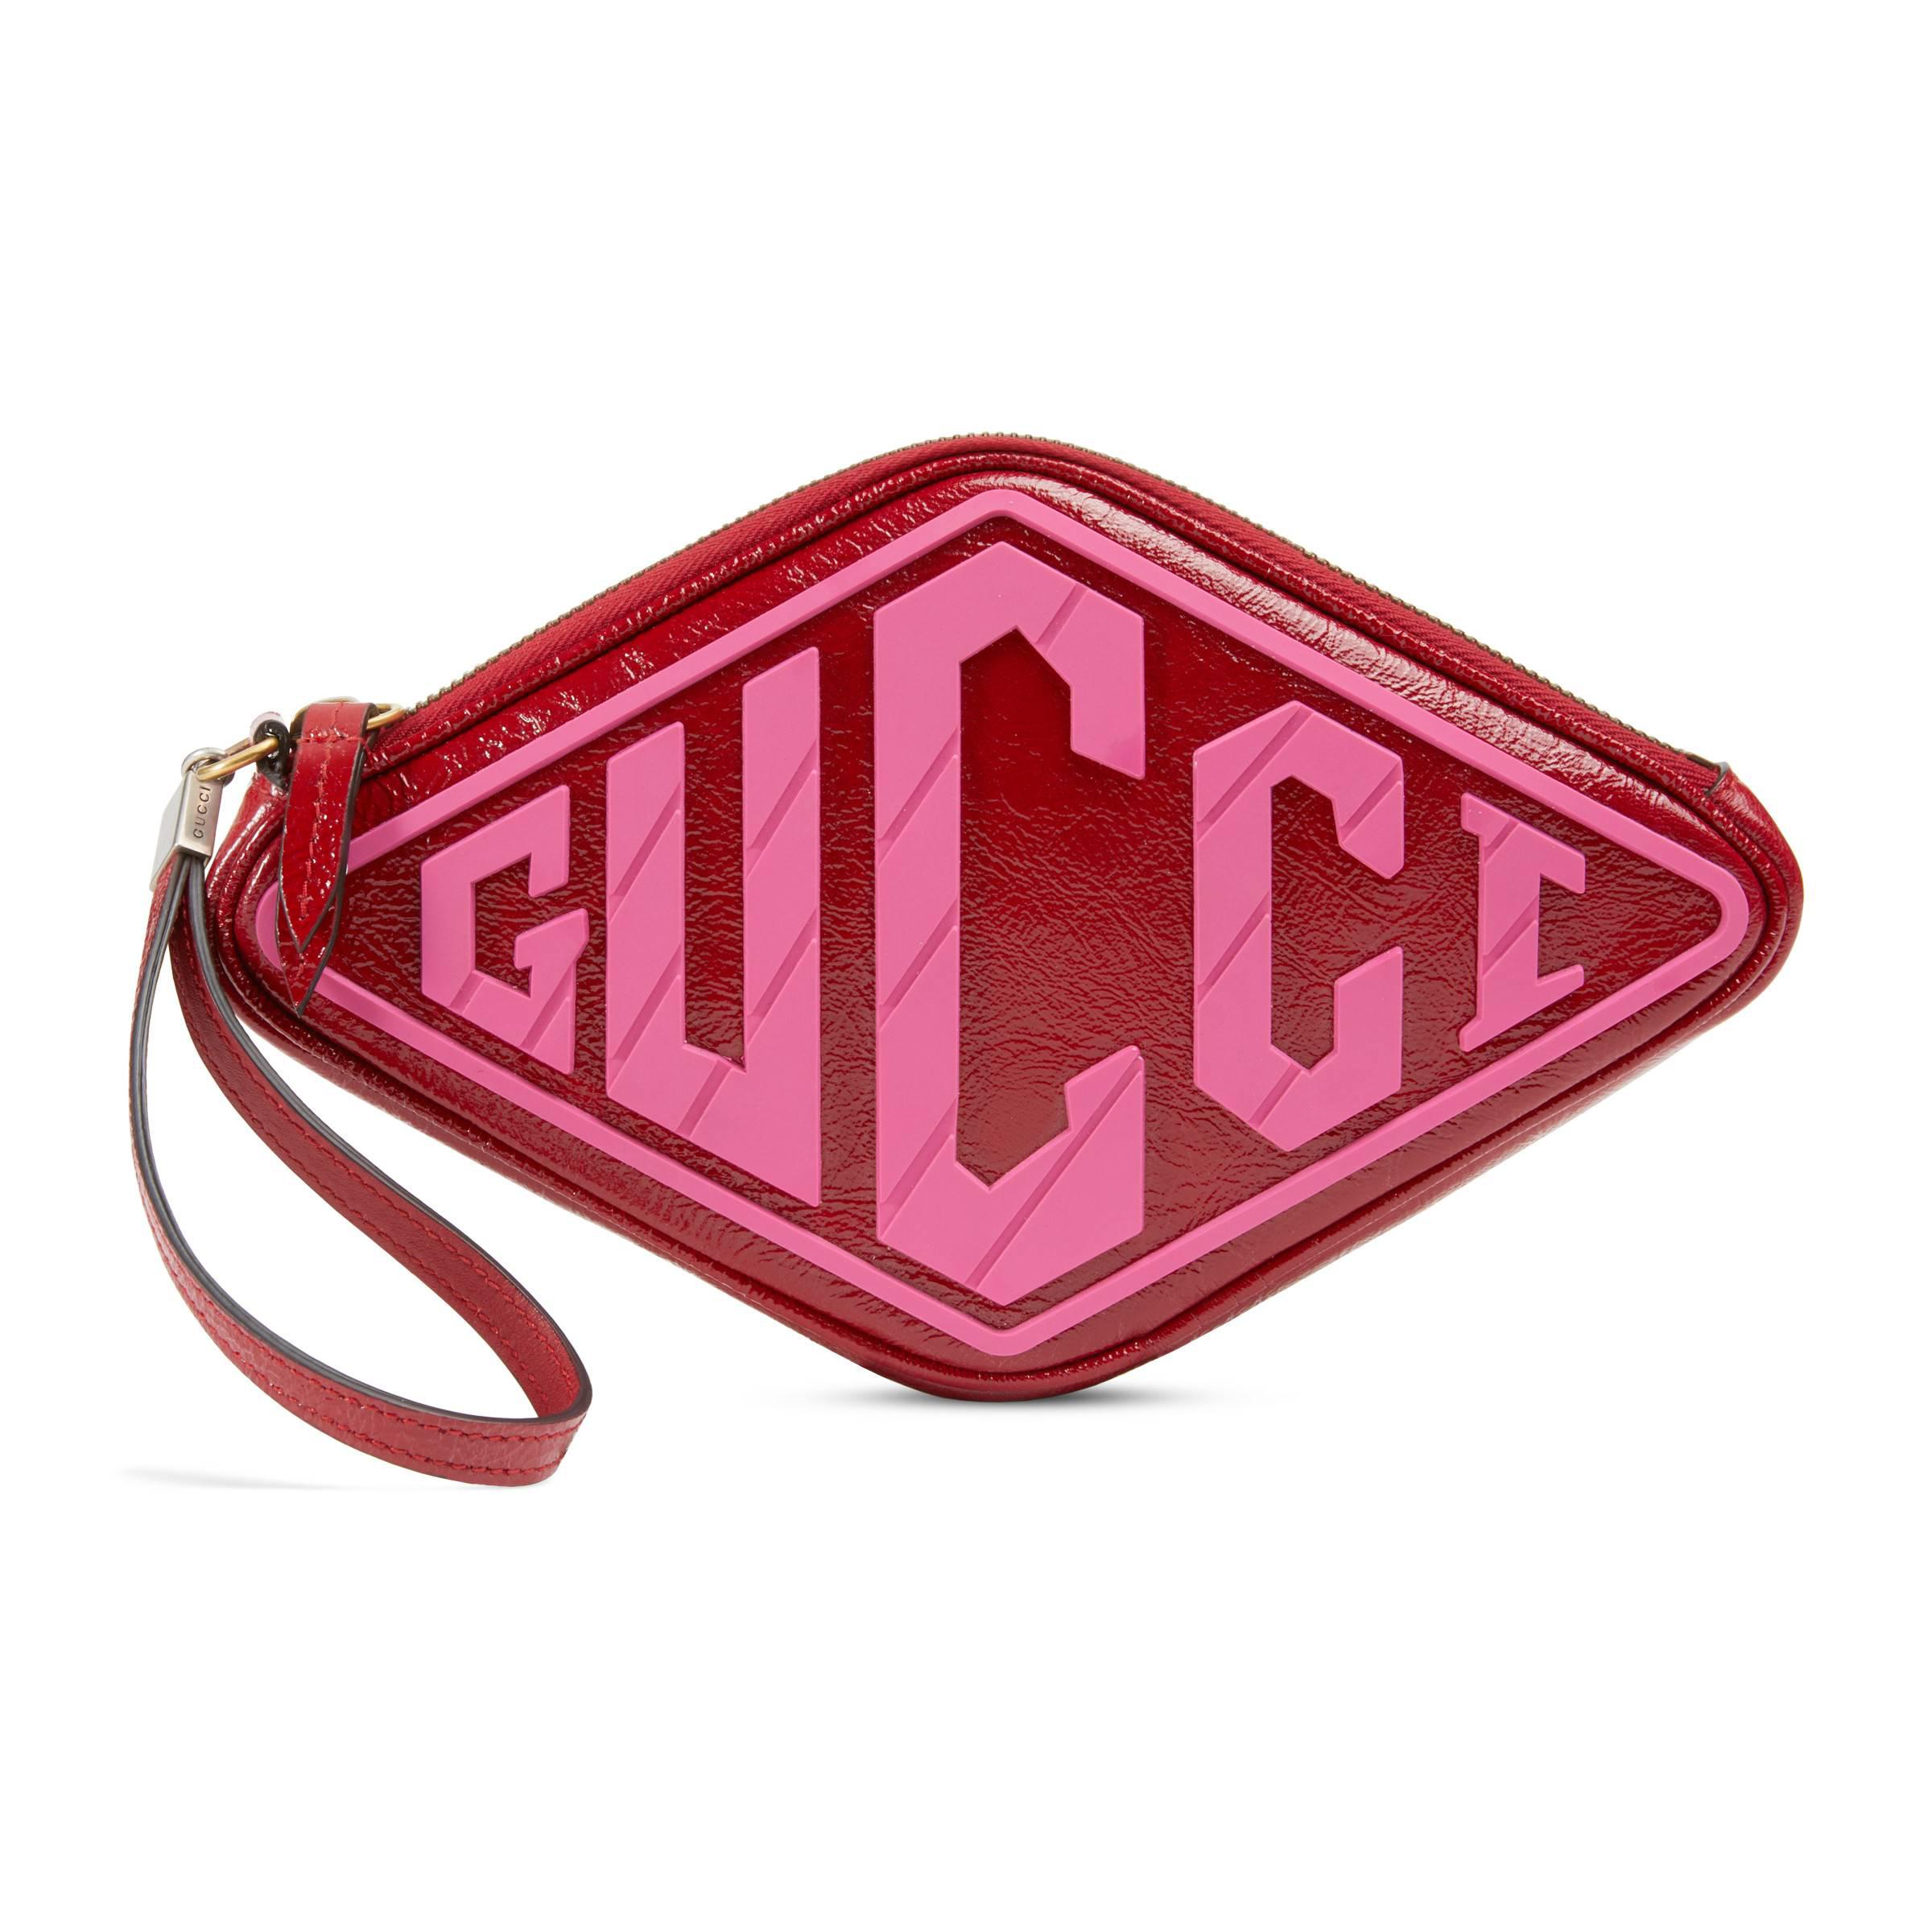 Gucci Rubber Game Wrist Wallet in Red - Lyst